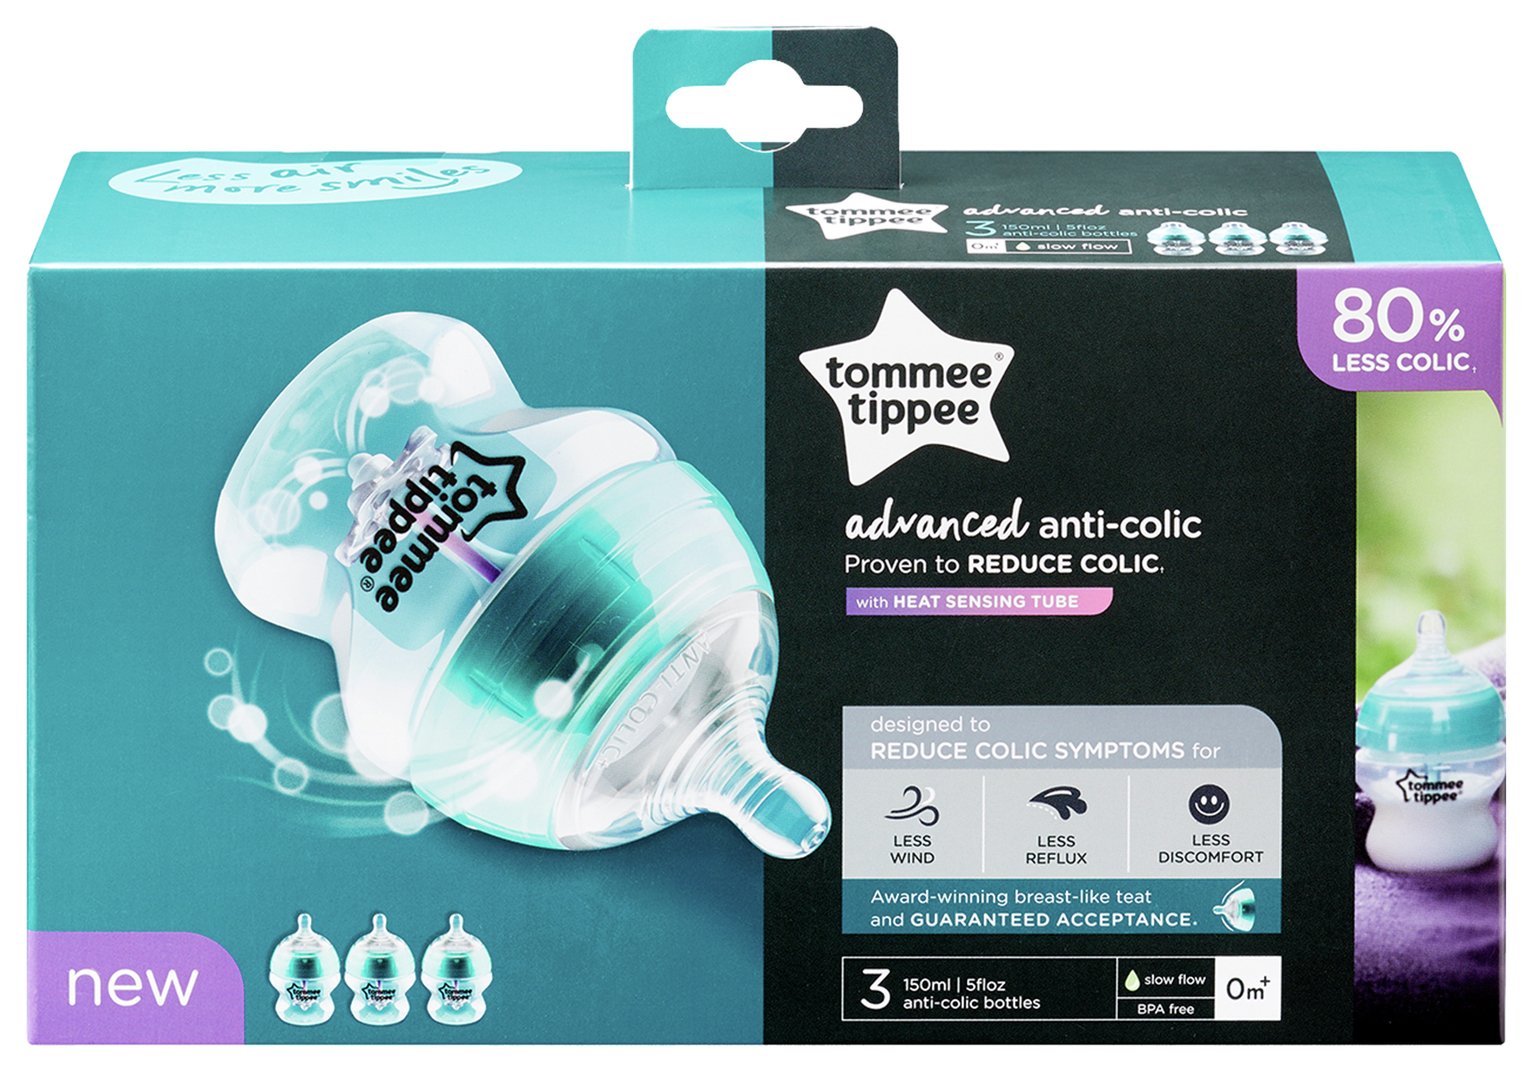 Tommee Tippee Advanced Anti-Colic Bottles Review